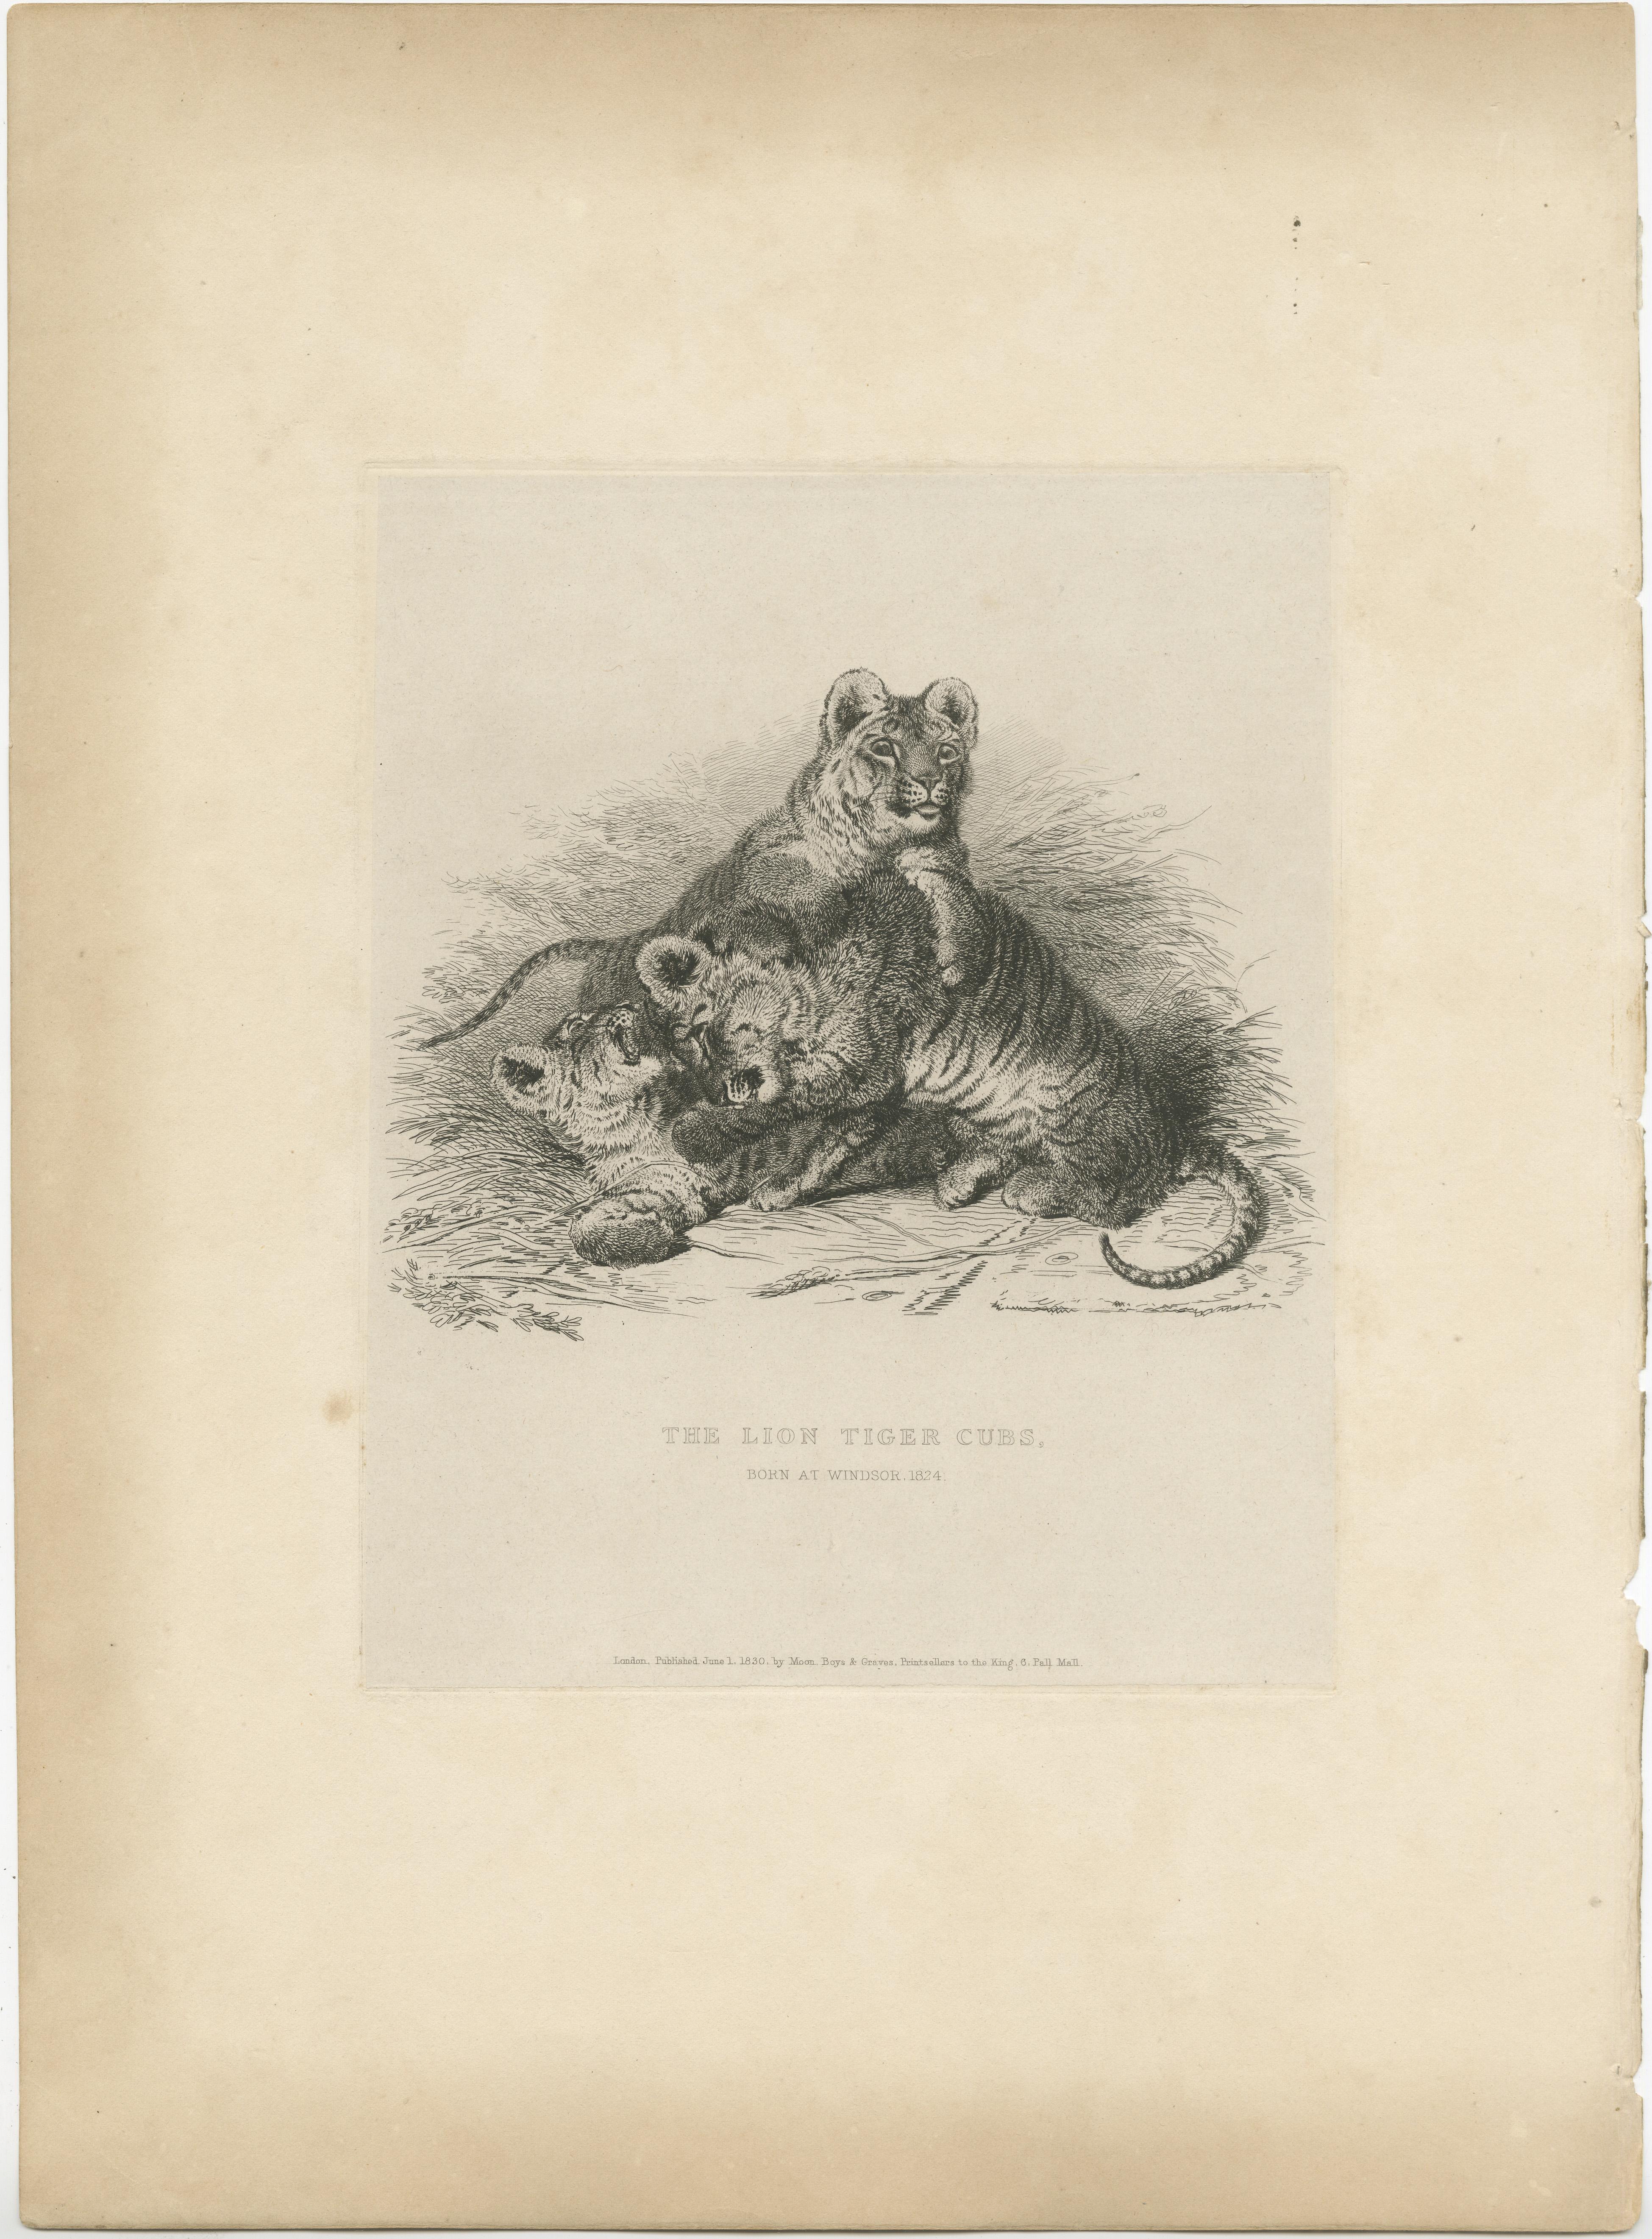 Antique print titled 'The Lion Tiger Cubs'. Original old print of tiger cubs. This print originates from the series 'Characteristic sketches of animals, principally from the Zoological Gardens, Regent's Park' published circa 1832 by John Henry